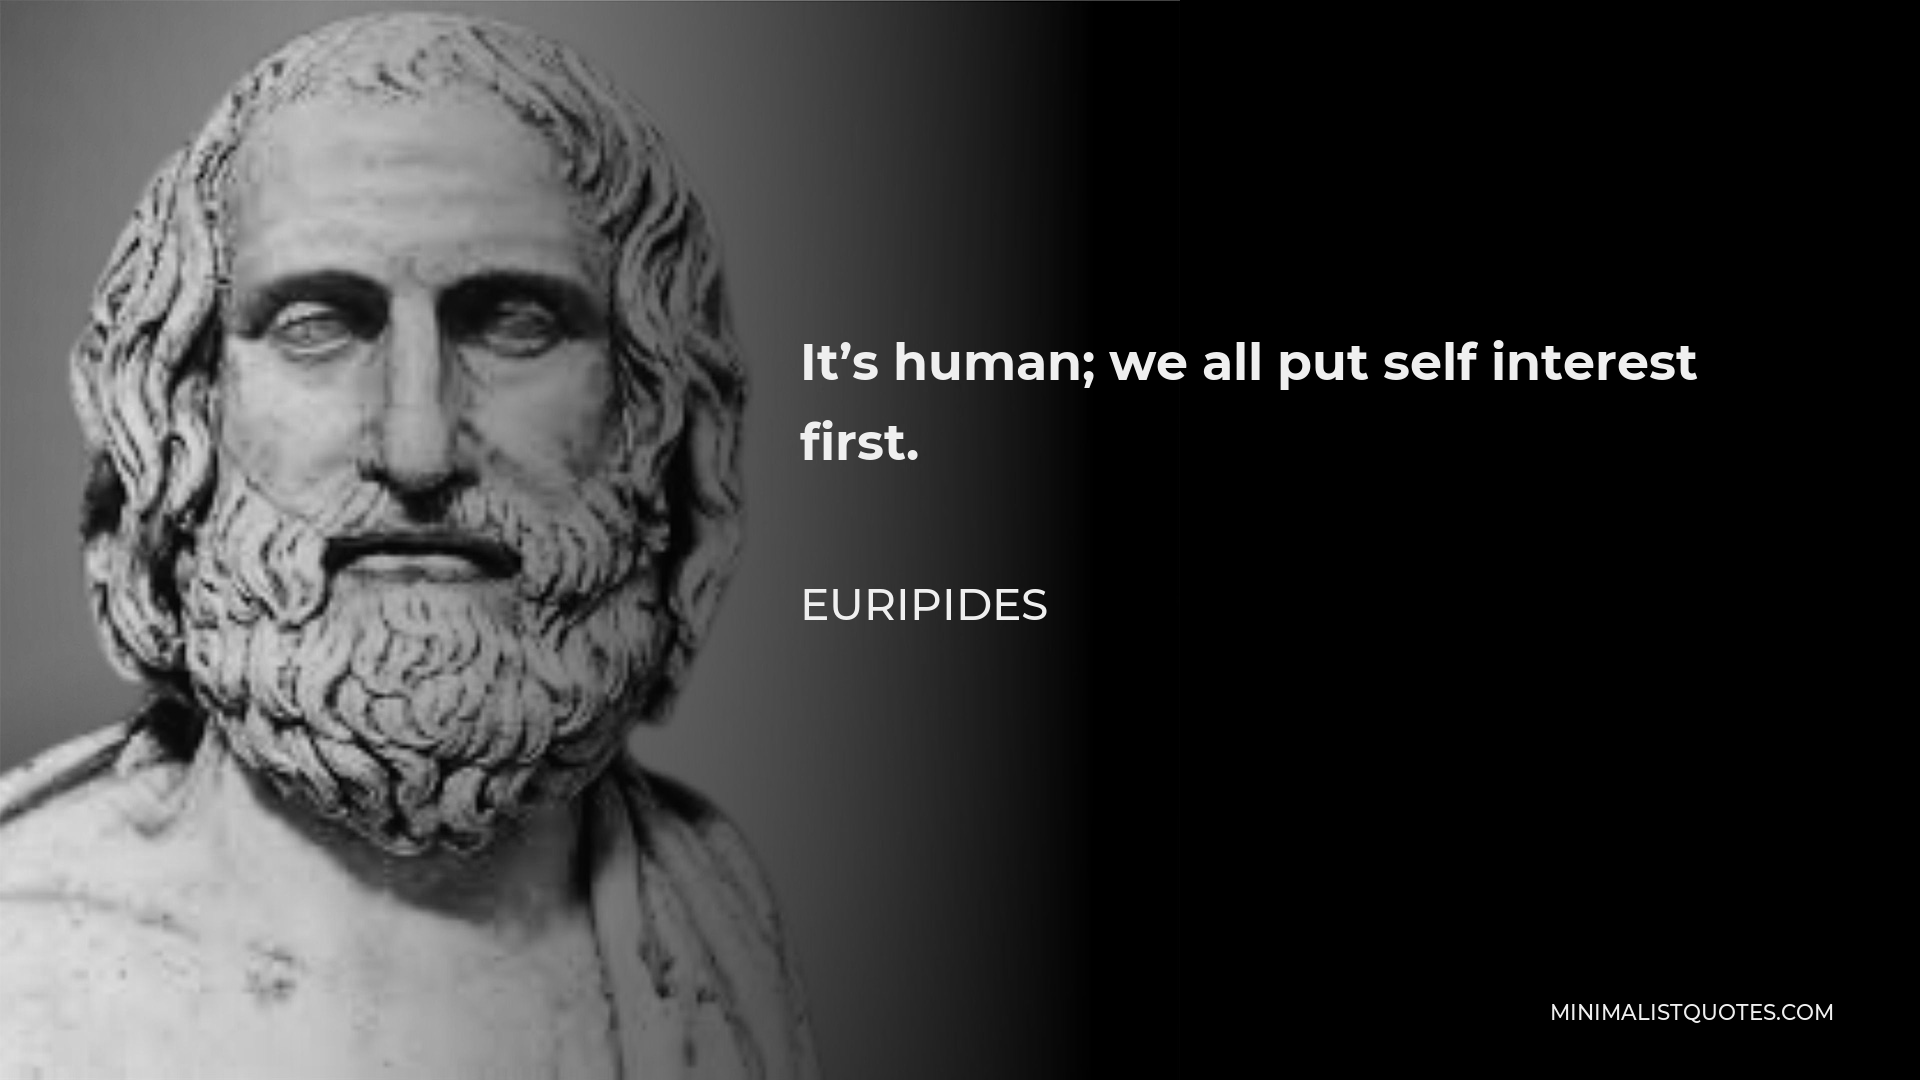 Euripides Quote - It’s human; we all put self interest first.